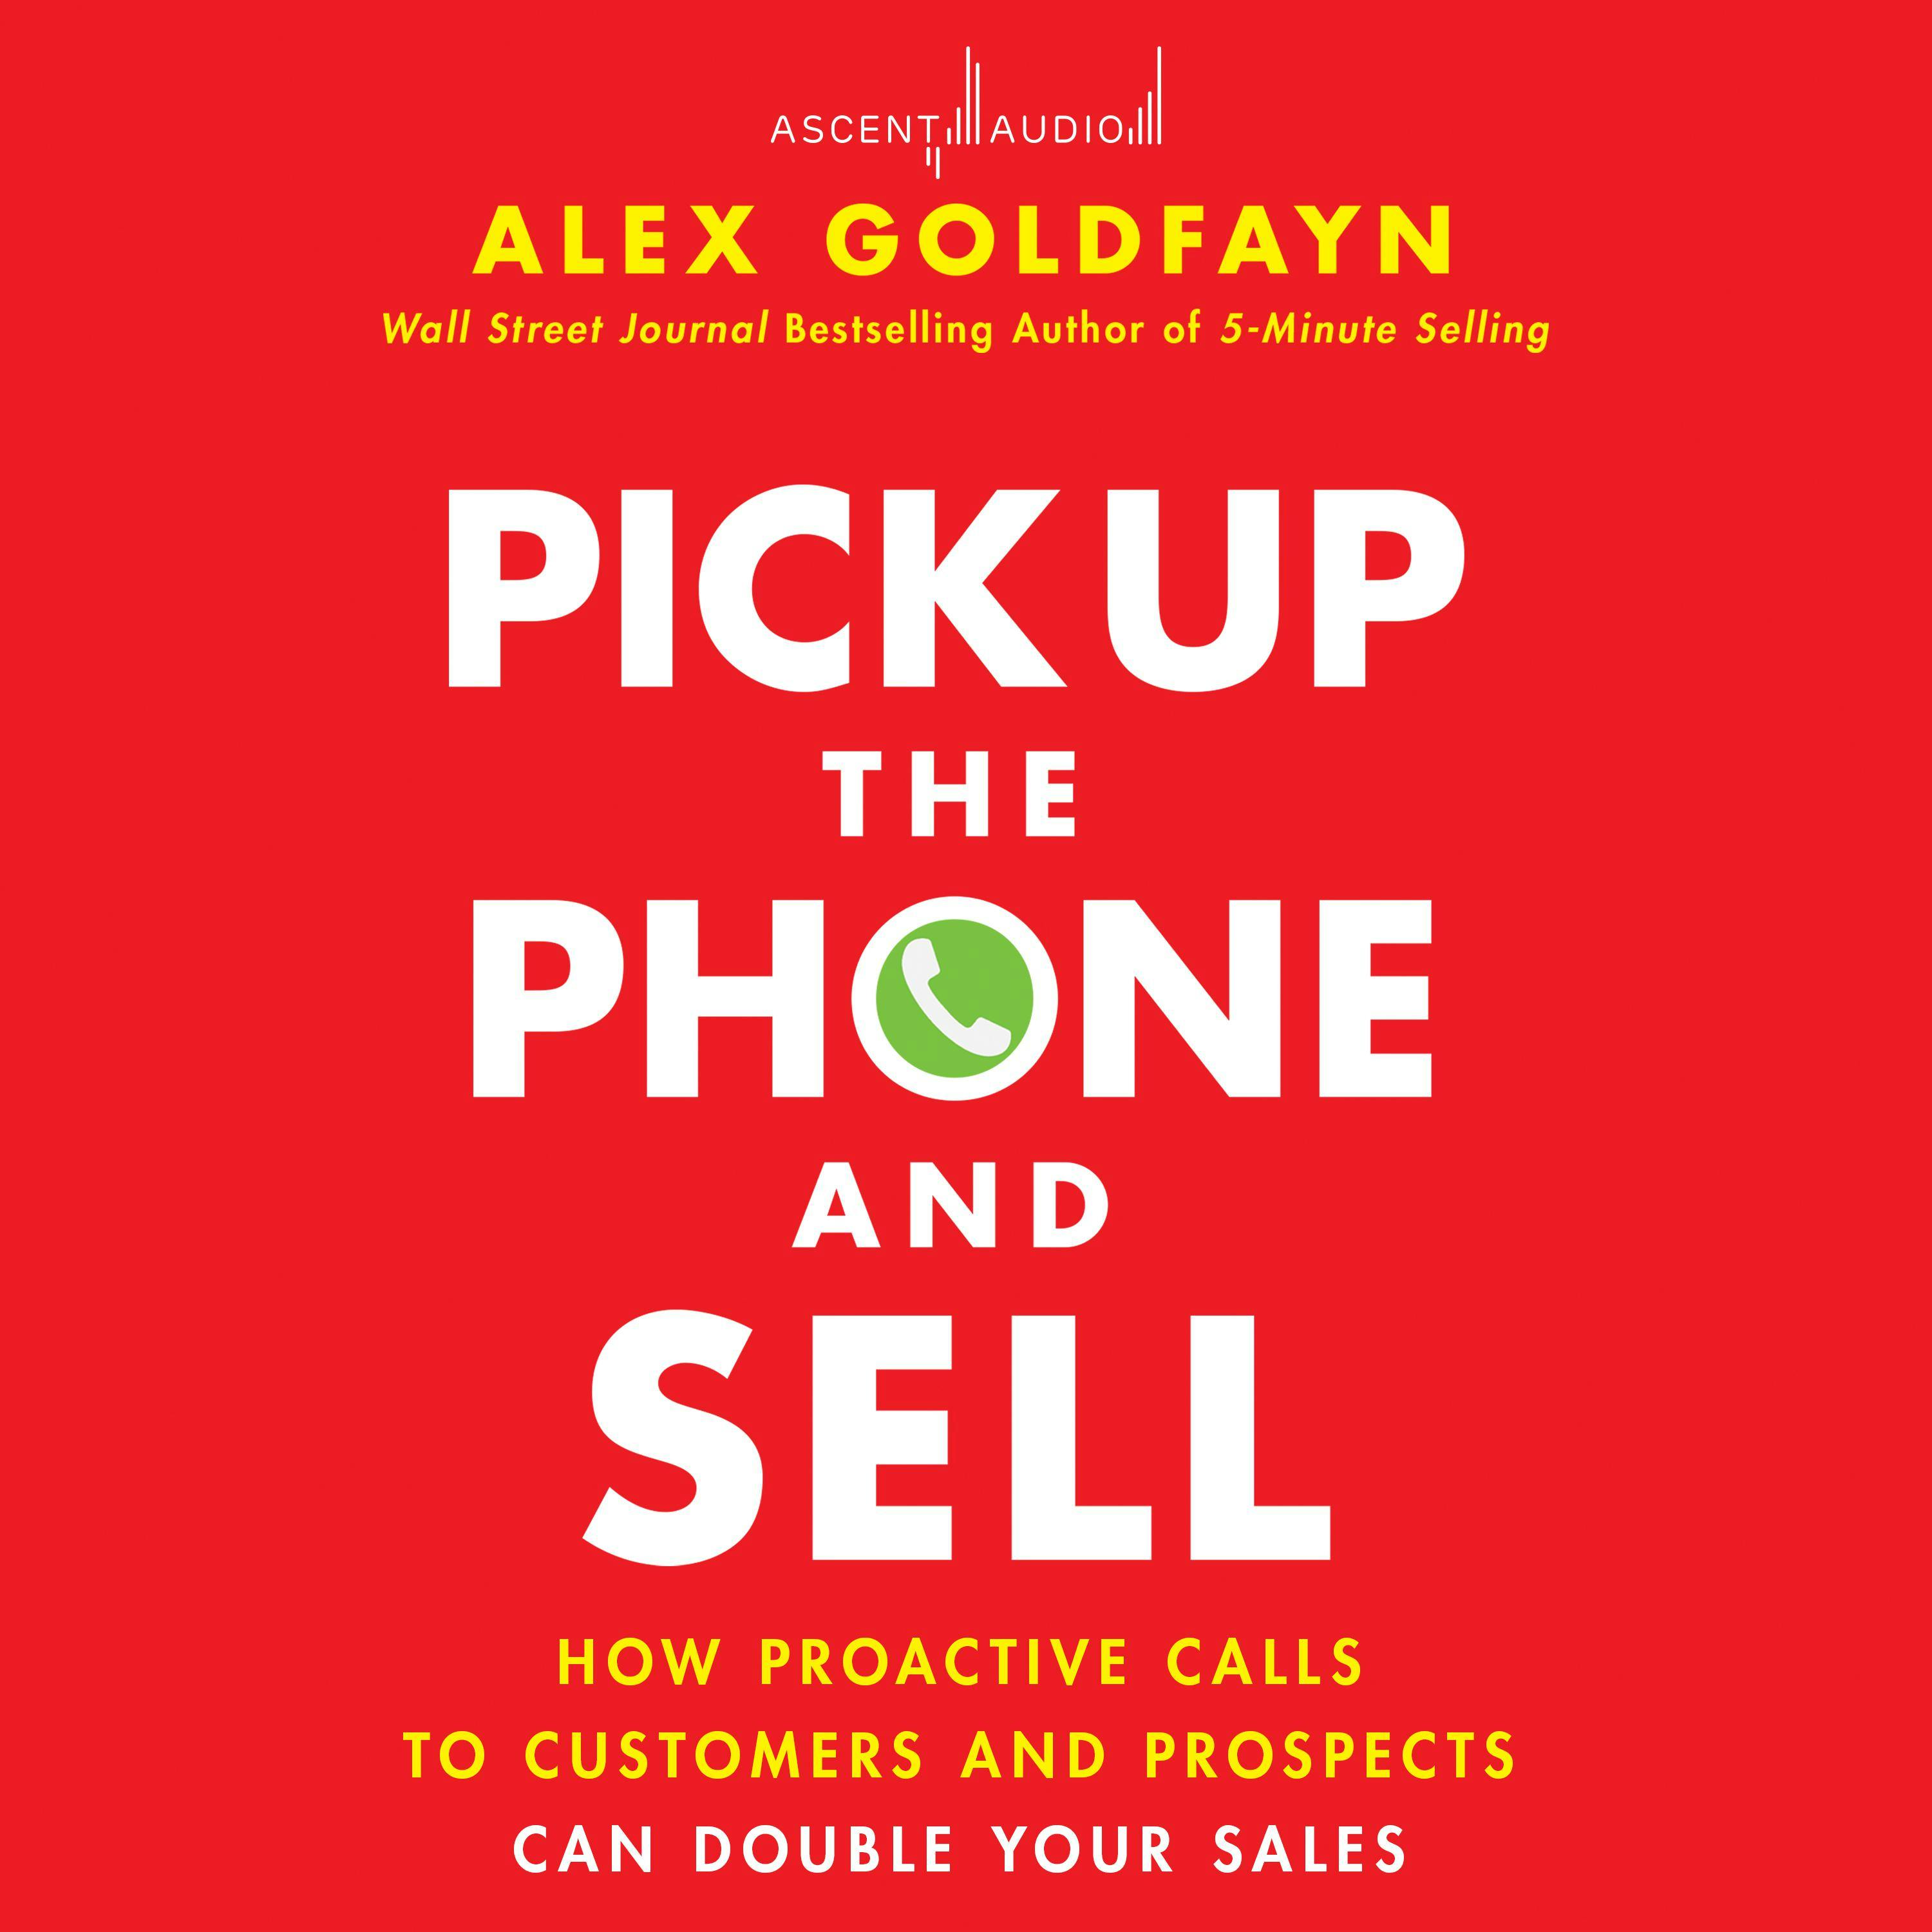 Pick Up The Phone and Sell: How Proactive Calls to Customers and Prospects Can Double Your Sales - Alex Goldfayn